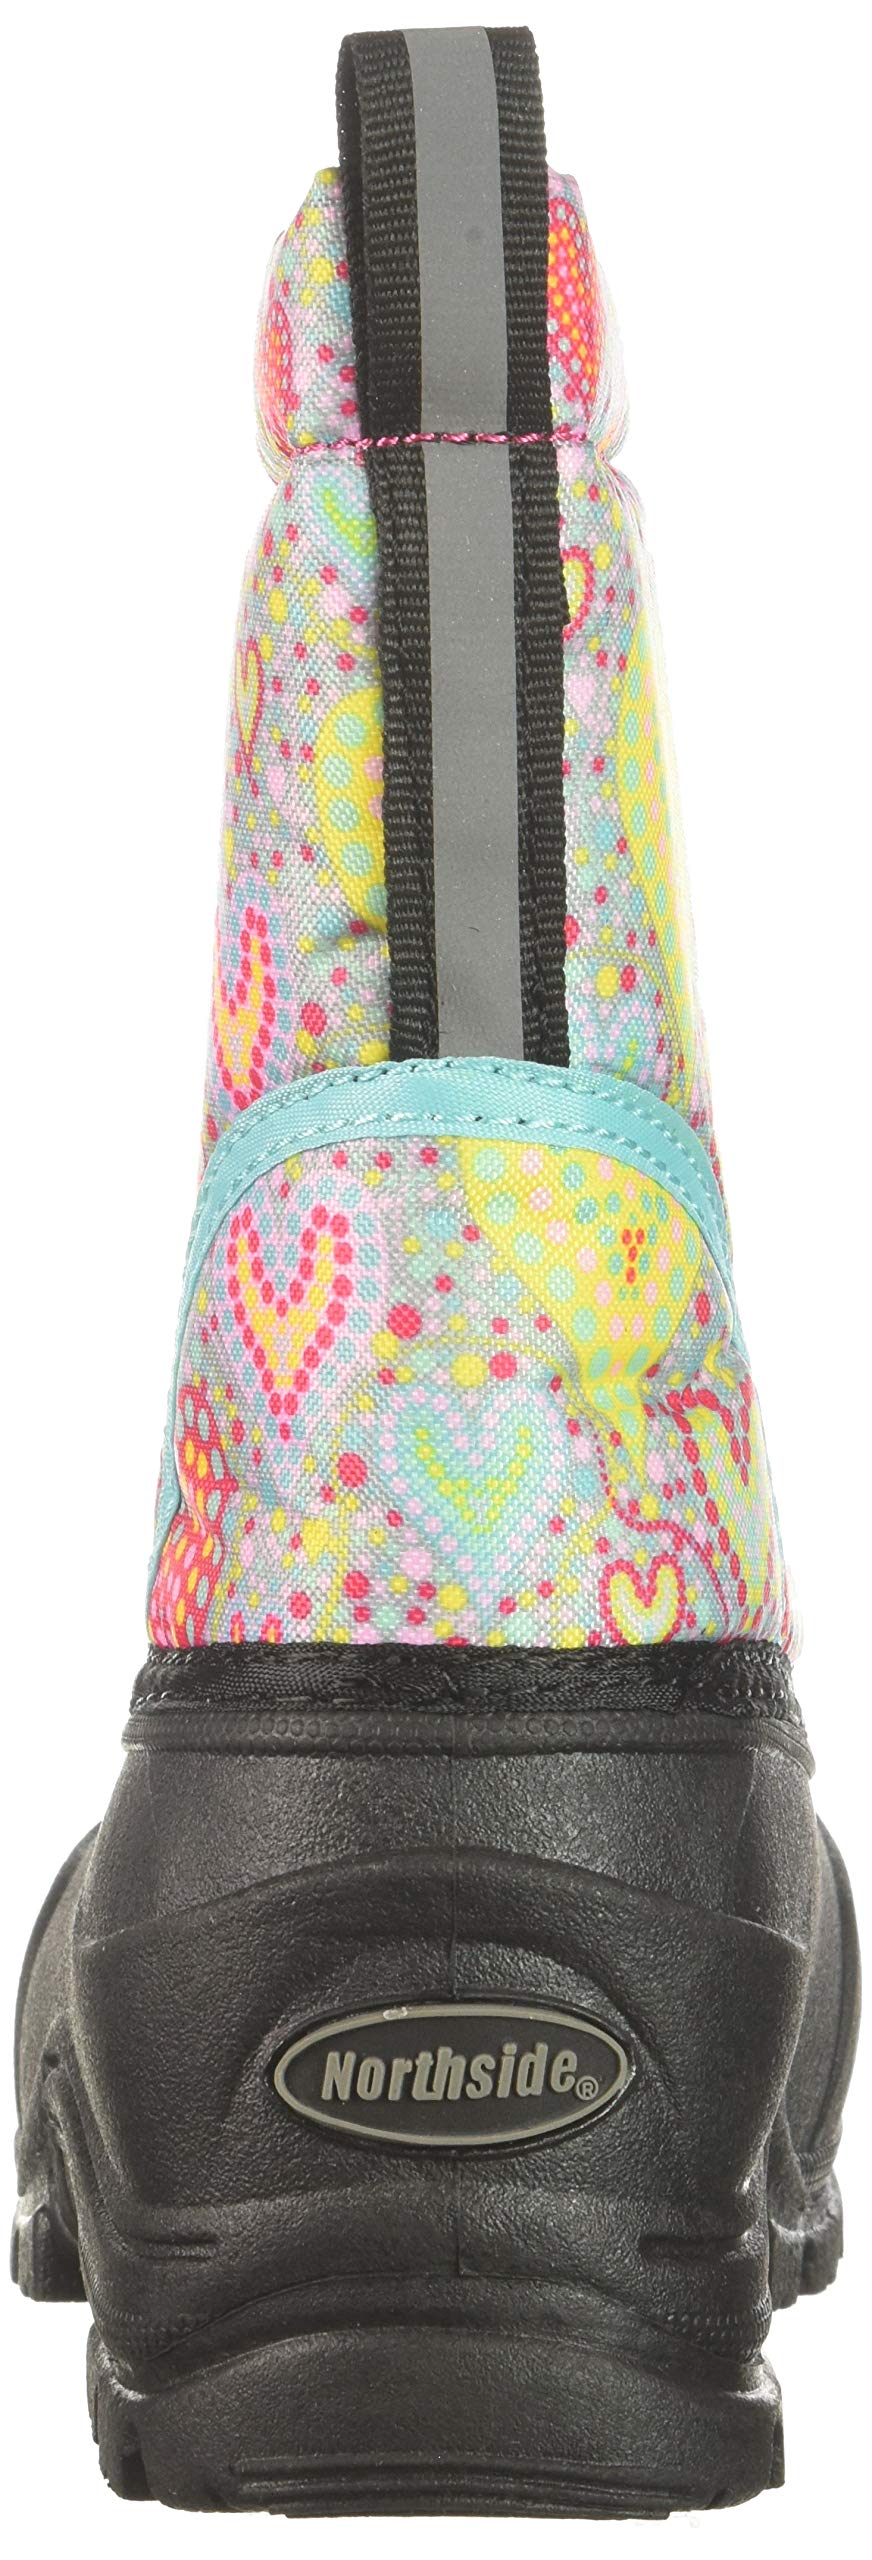 Northside Icicle Insulated Snow Boots for Girls and Boys - Toddler and Little Kid - with Washable EVA Insole, Shock Absorbing Outsole with Good Traction and a Front Zipper